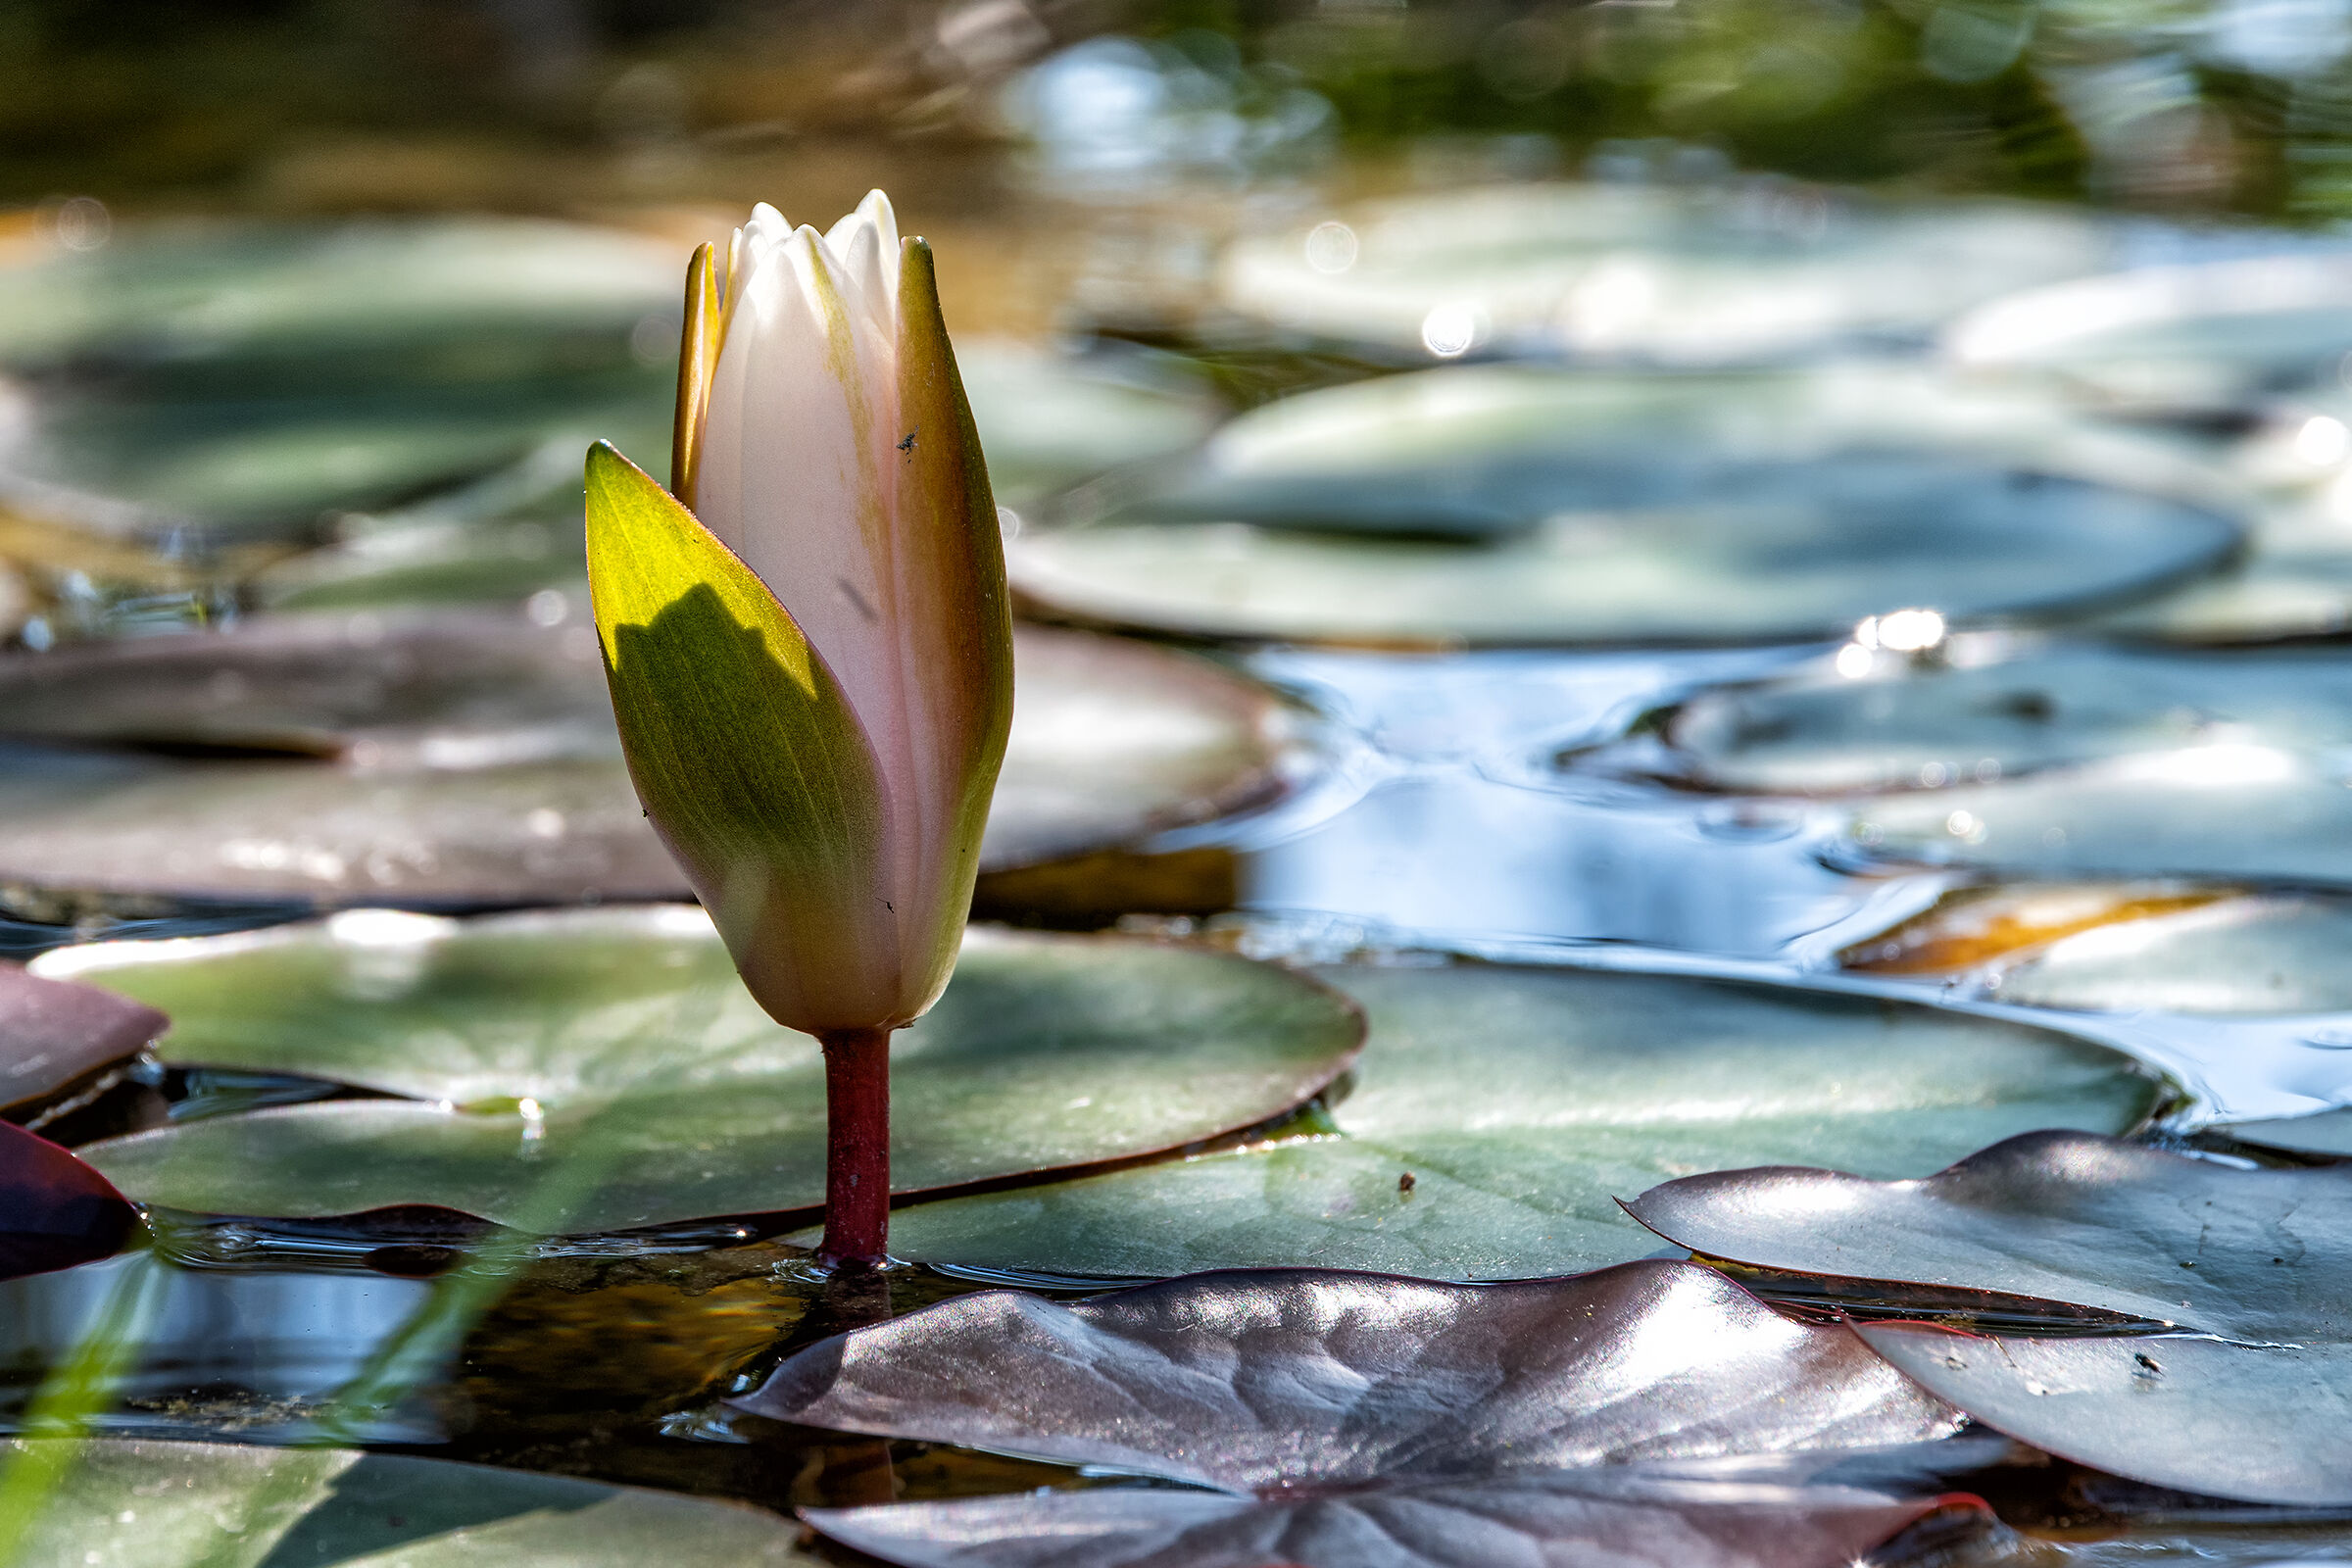 Water lily in bud...